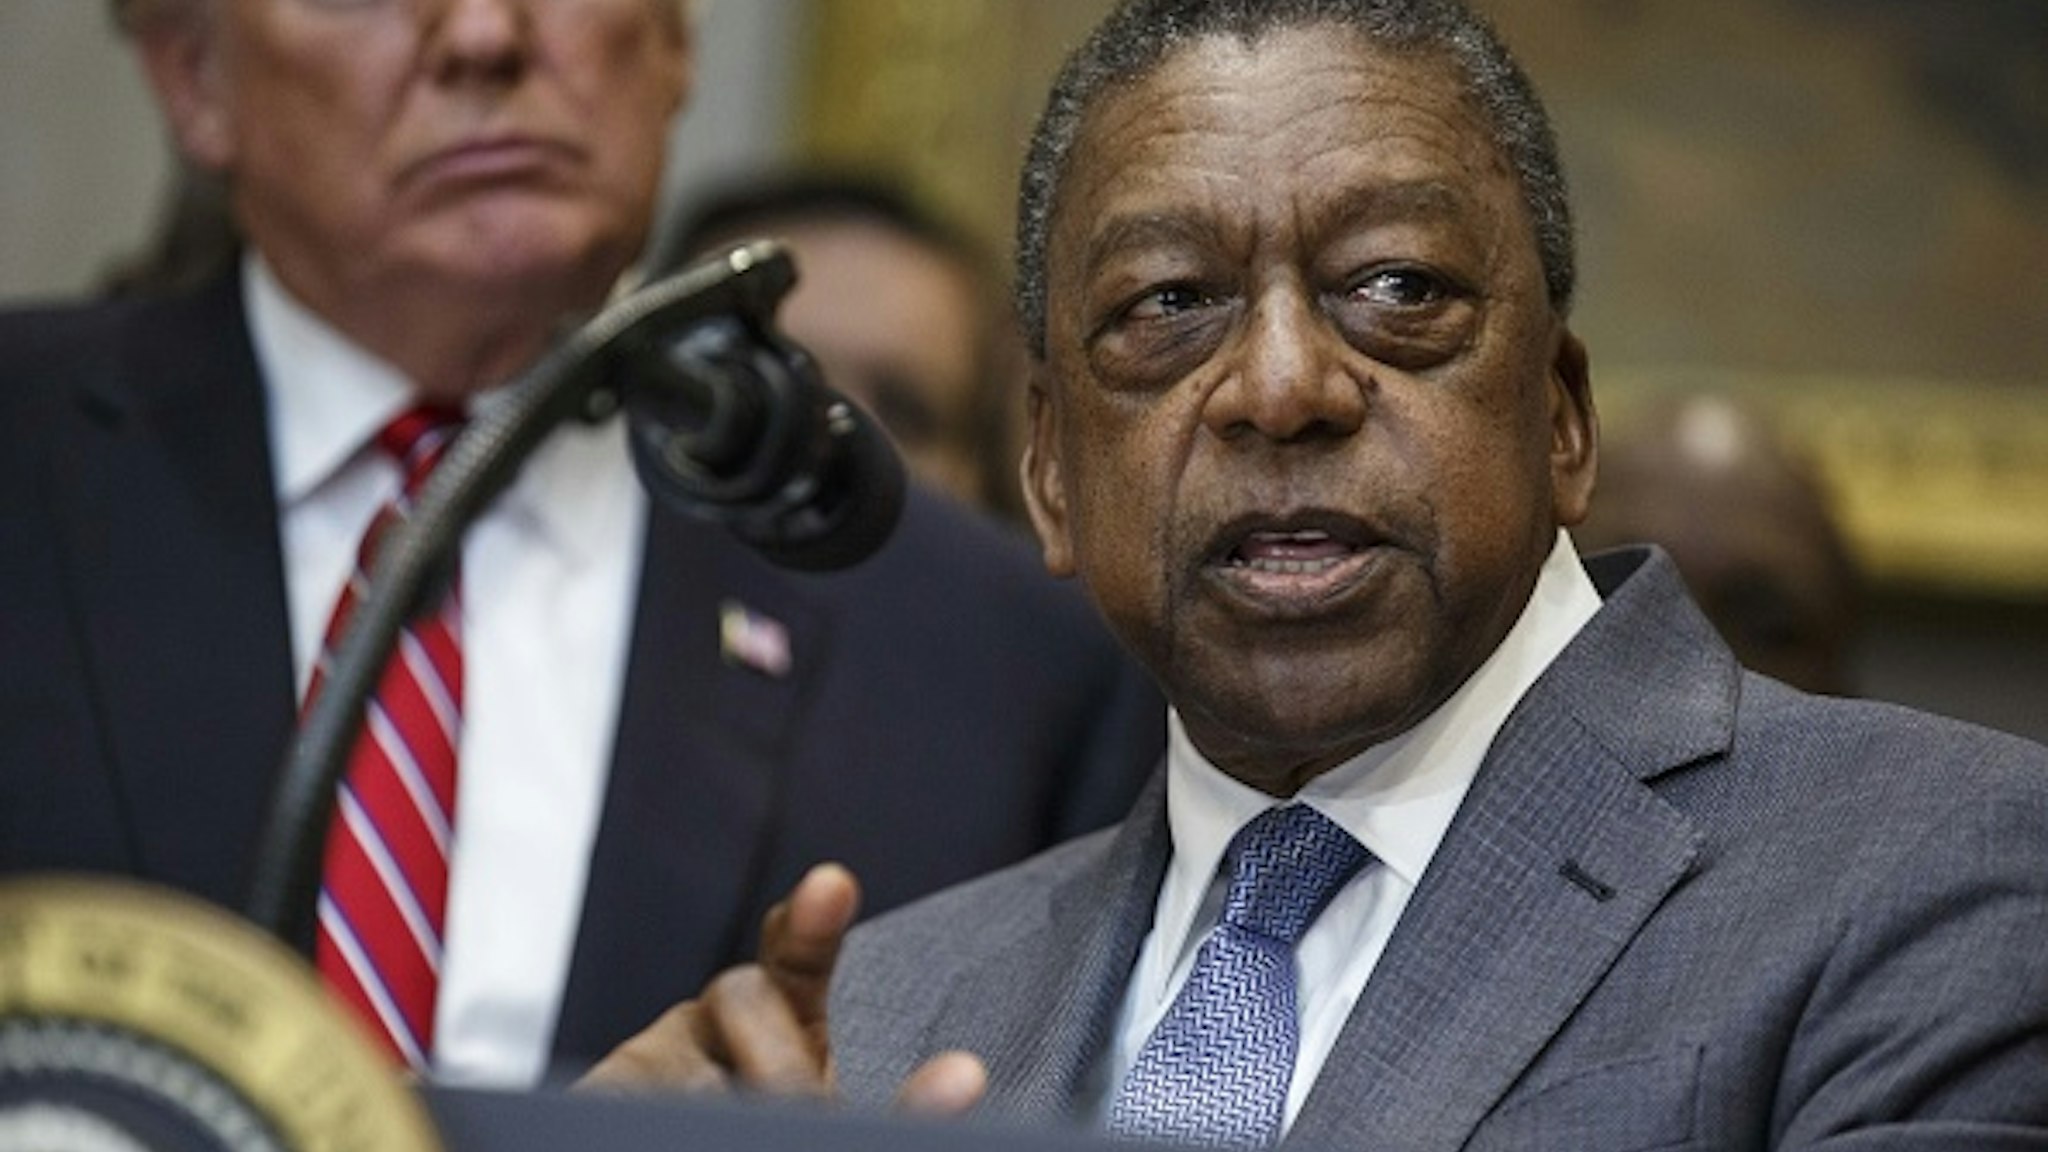 Robert Johnson, founder of Rlj Cos. and co-founder of Black Entertainment Television (BET), speaks during an executive order signing in the Roosevelt Room of the White House in Washington, D.C., U.S., on Wednesday, Dec. 12, 2018. President Donald Trump signed an order to create a White House Opportunity and Revitalization Council, directing federal agencies to steer spending toward certain distressed communities across the country called opportunity zone.